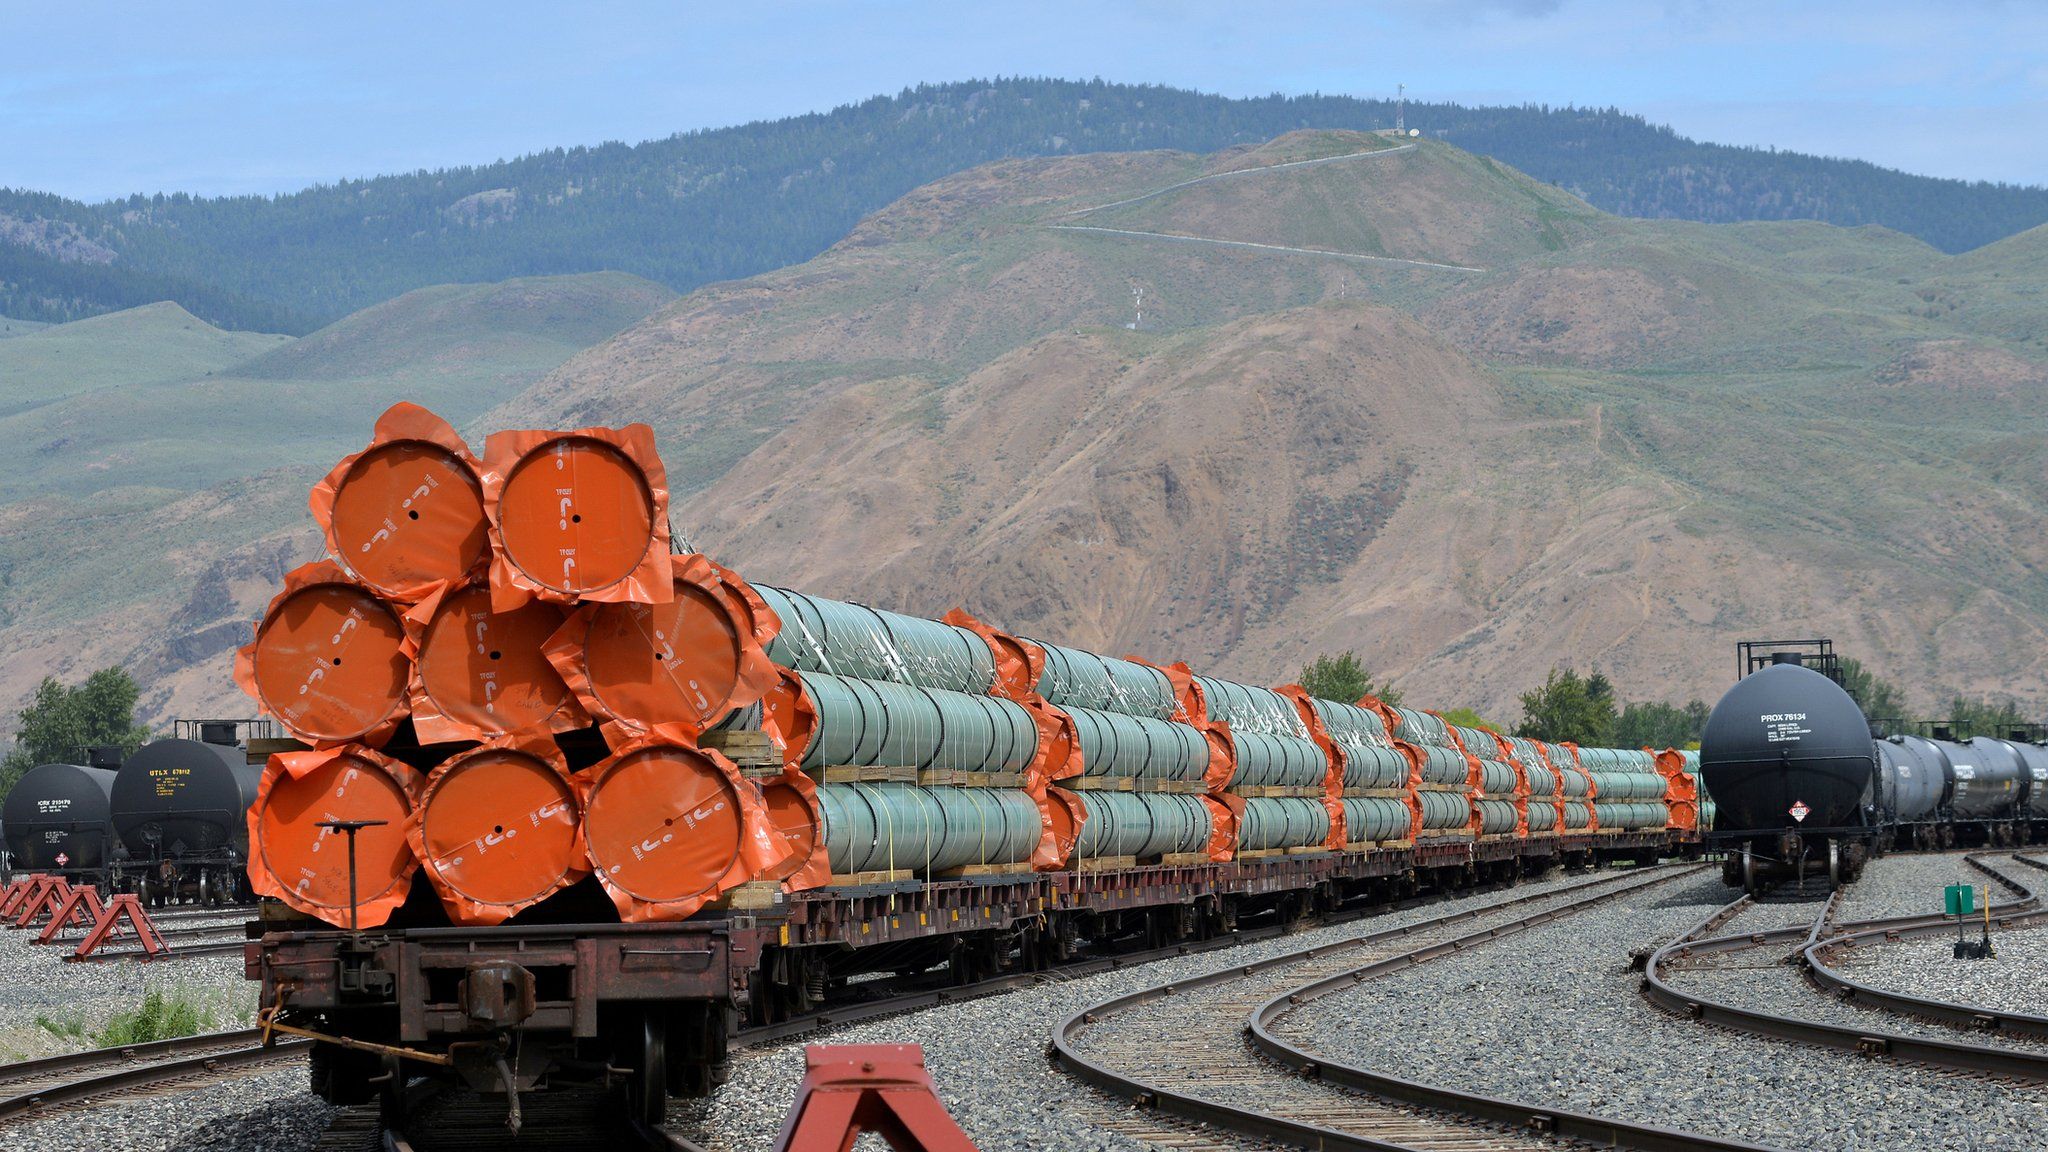 Steel pipe to be used in the oil pipeline construction of Kinder Morgan Canada"s Trans Mountain Expansion Project sit on rail cars at a stockpile site in Kamloops, British Columbia,